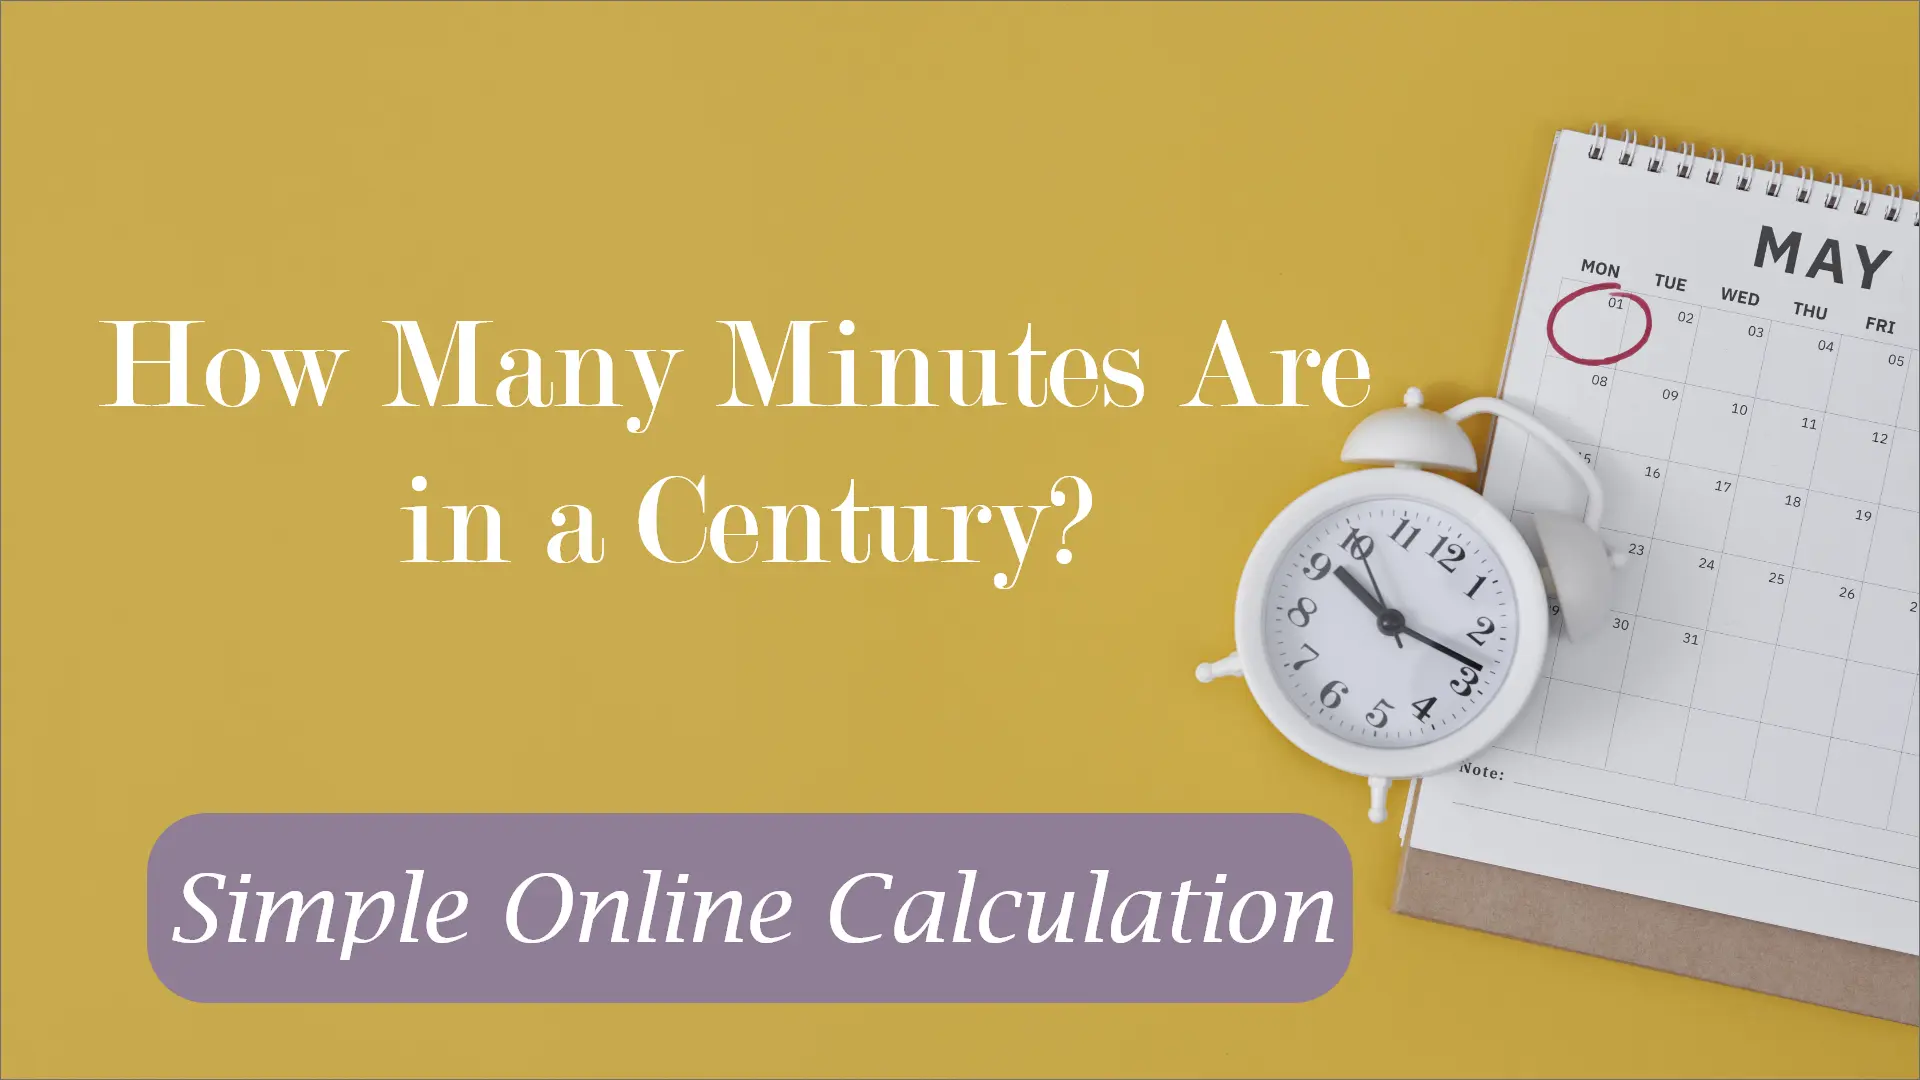 How Many Minutes in a Century